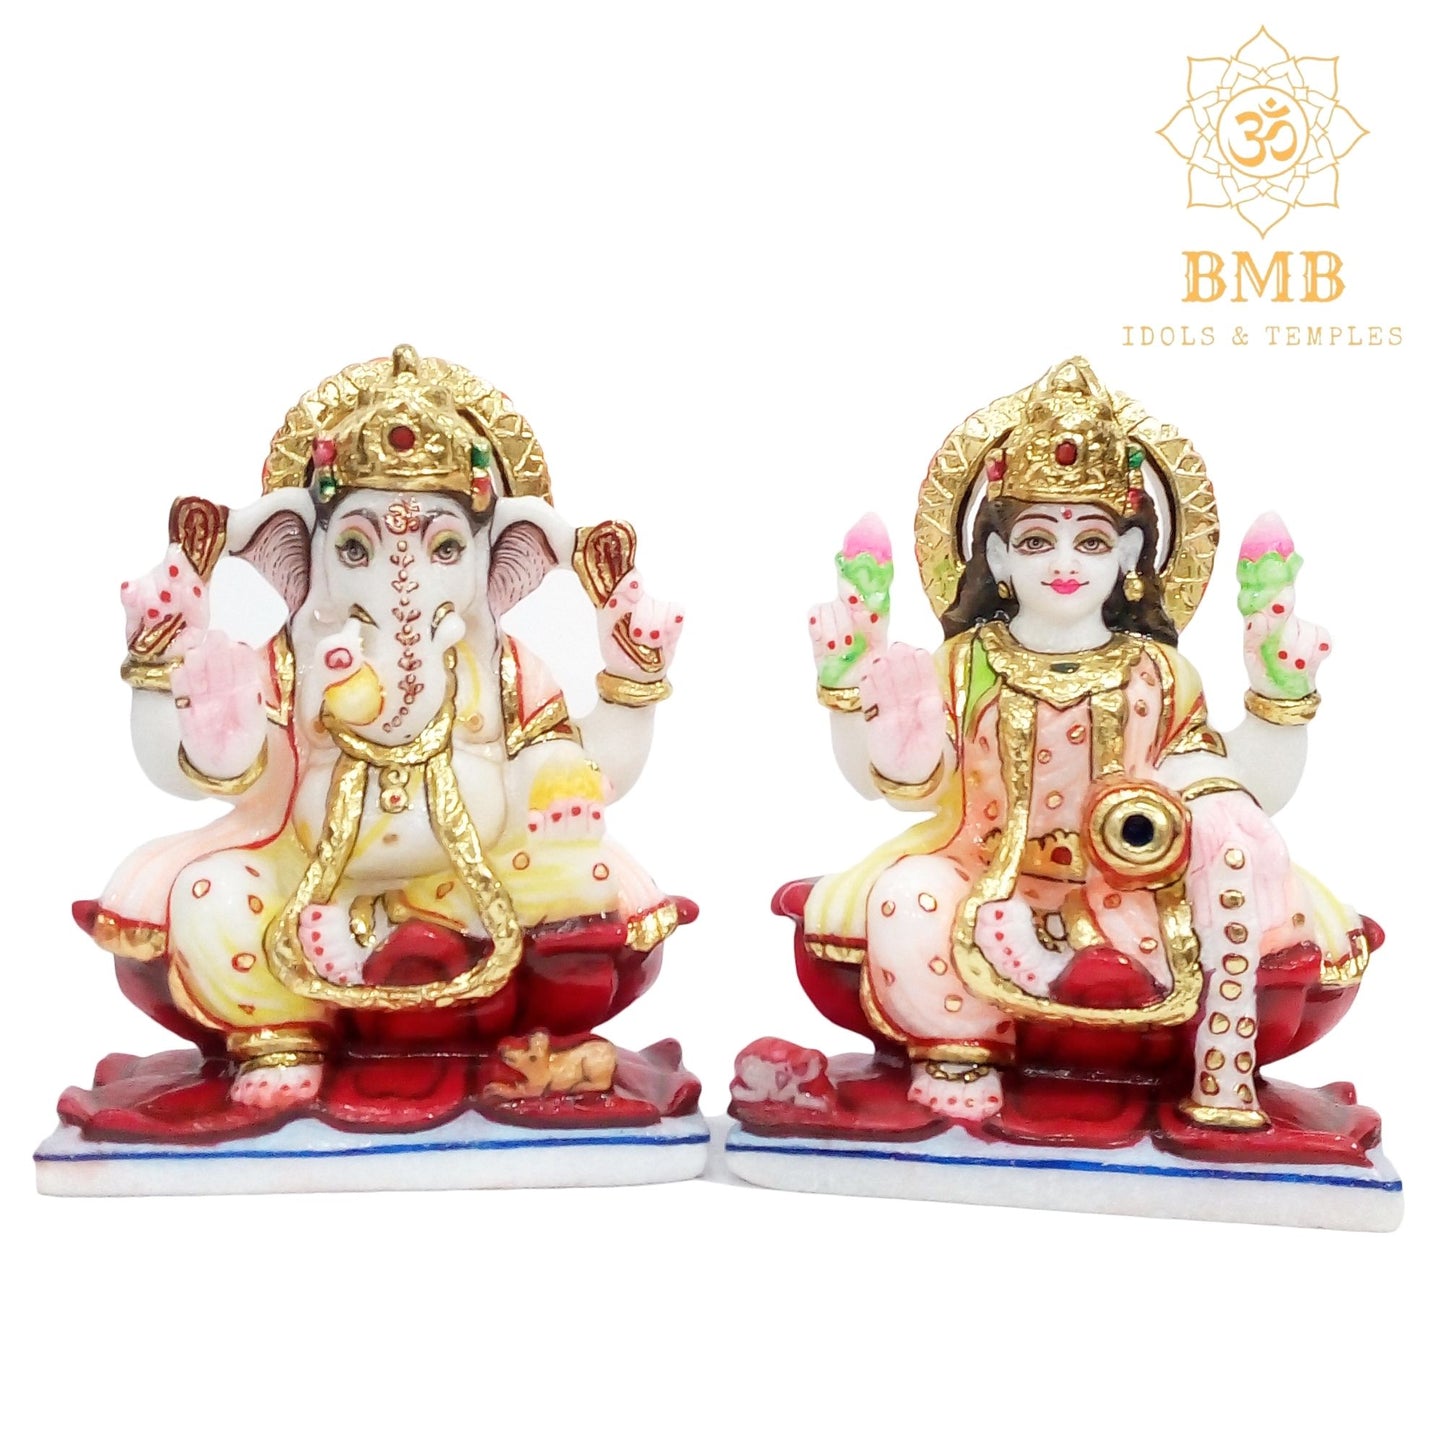 Marble Ganesh Lakshmi Statue made in Marble in 6inches for Home